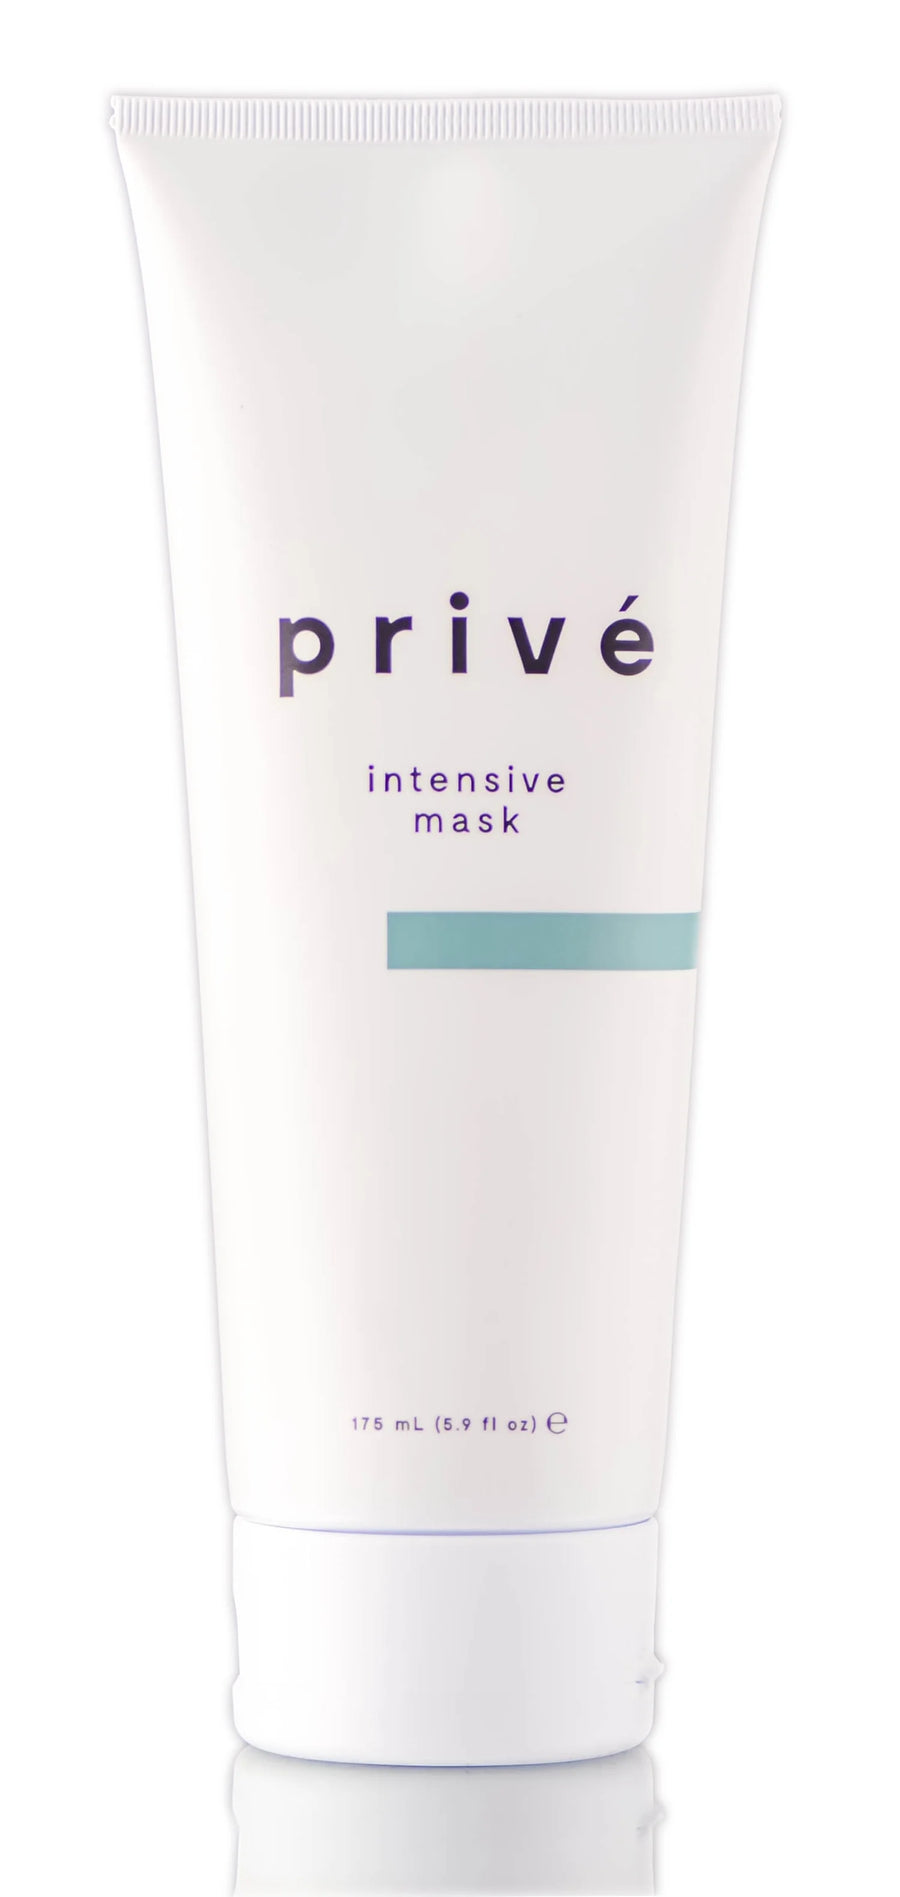 Prive Intensive Mask picture of 5.9 oz bottle